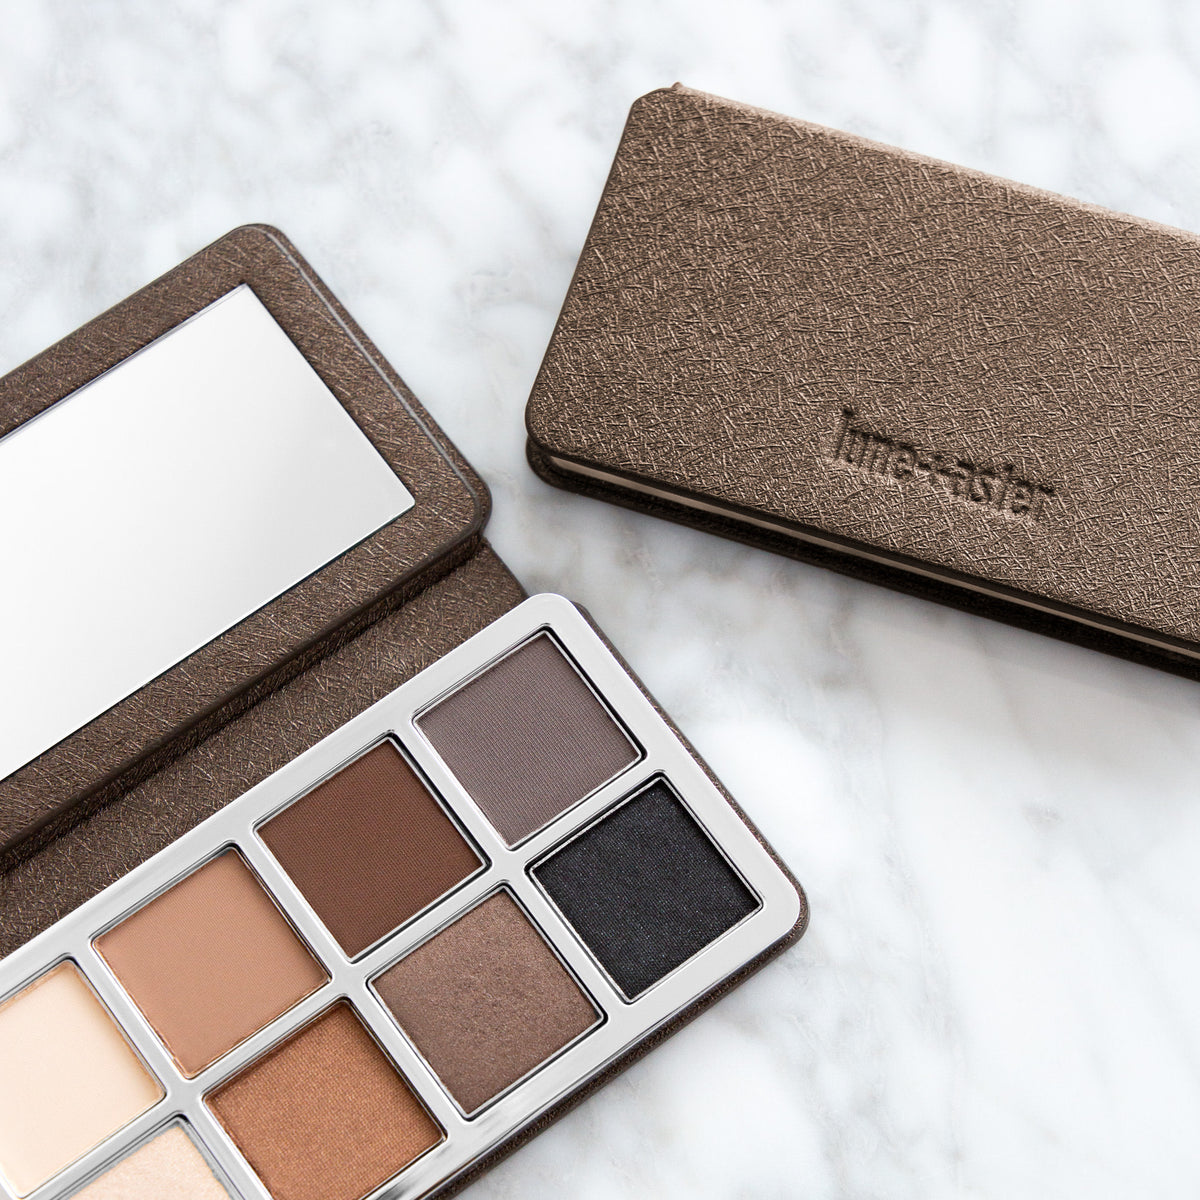 Lune+Aster Celestial Nudes Eyeshadow Palette . This product is in the color multi